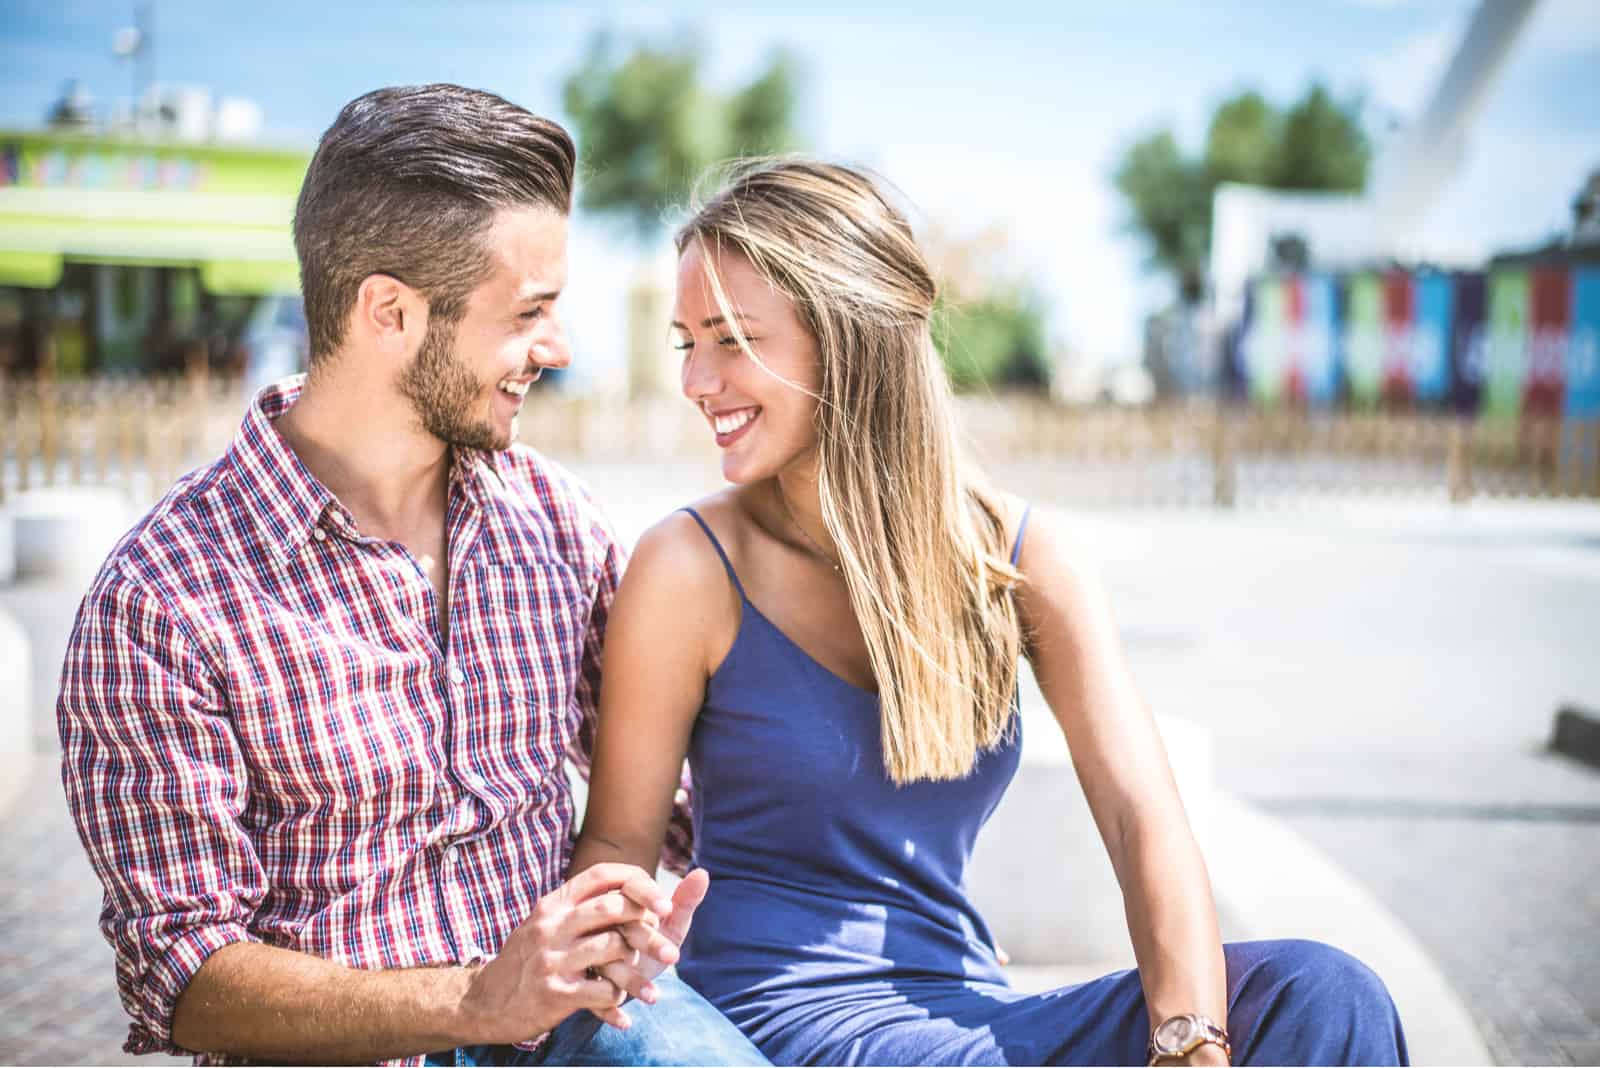 a smiling man and woman sit and hold hands